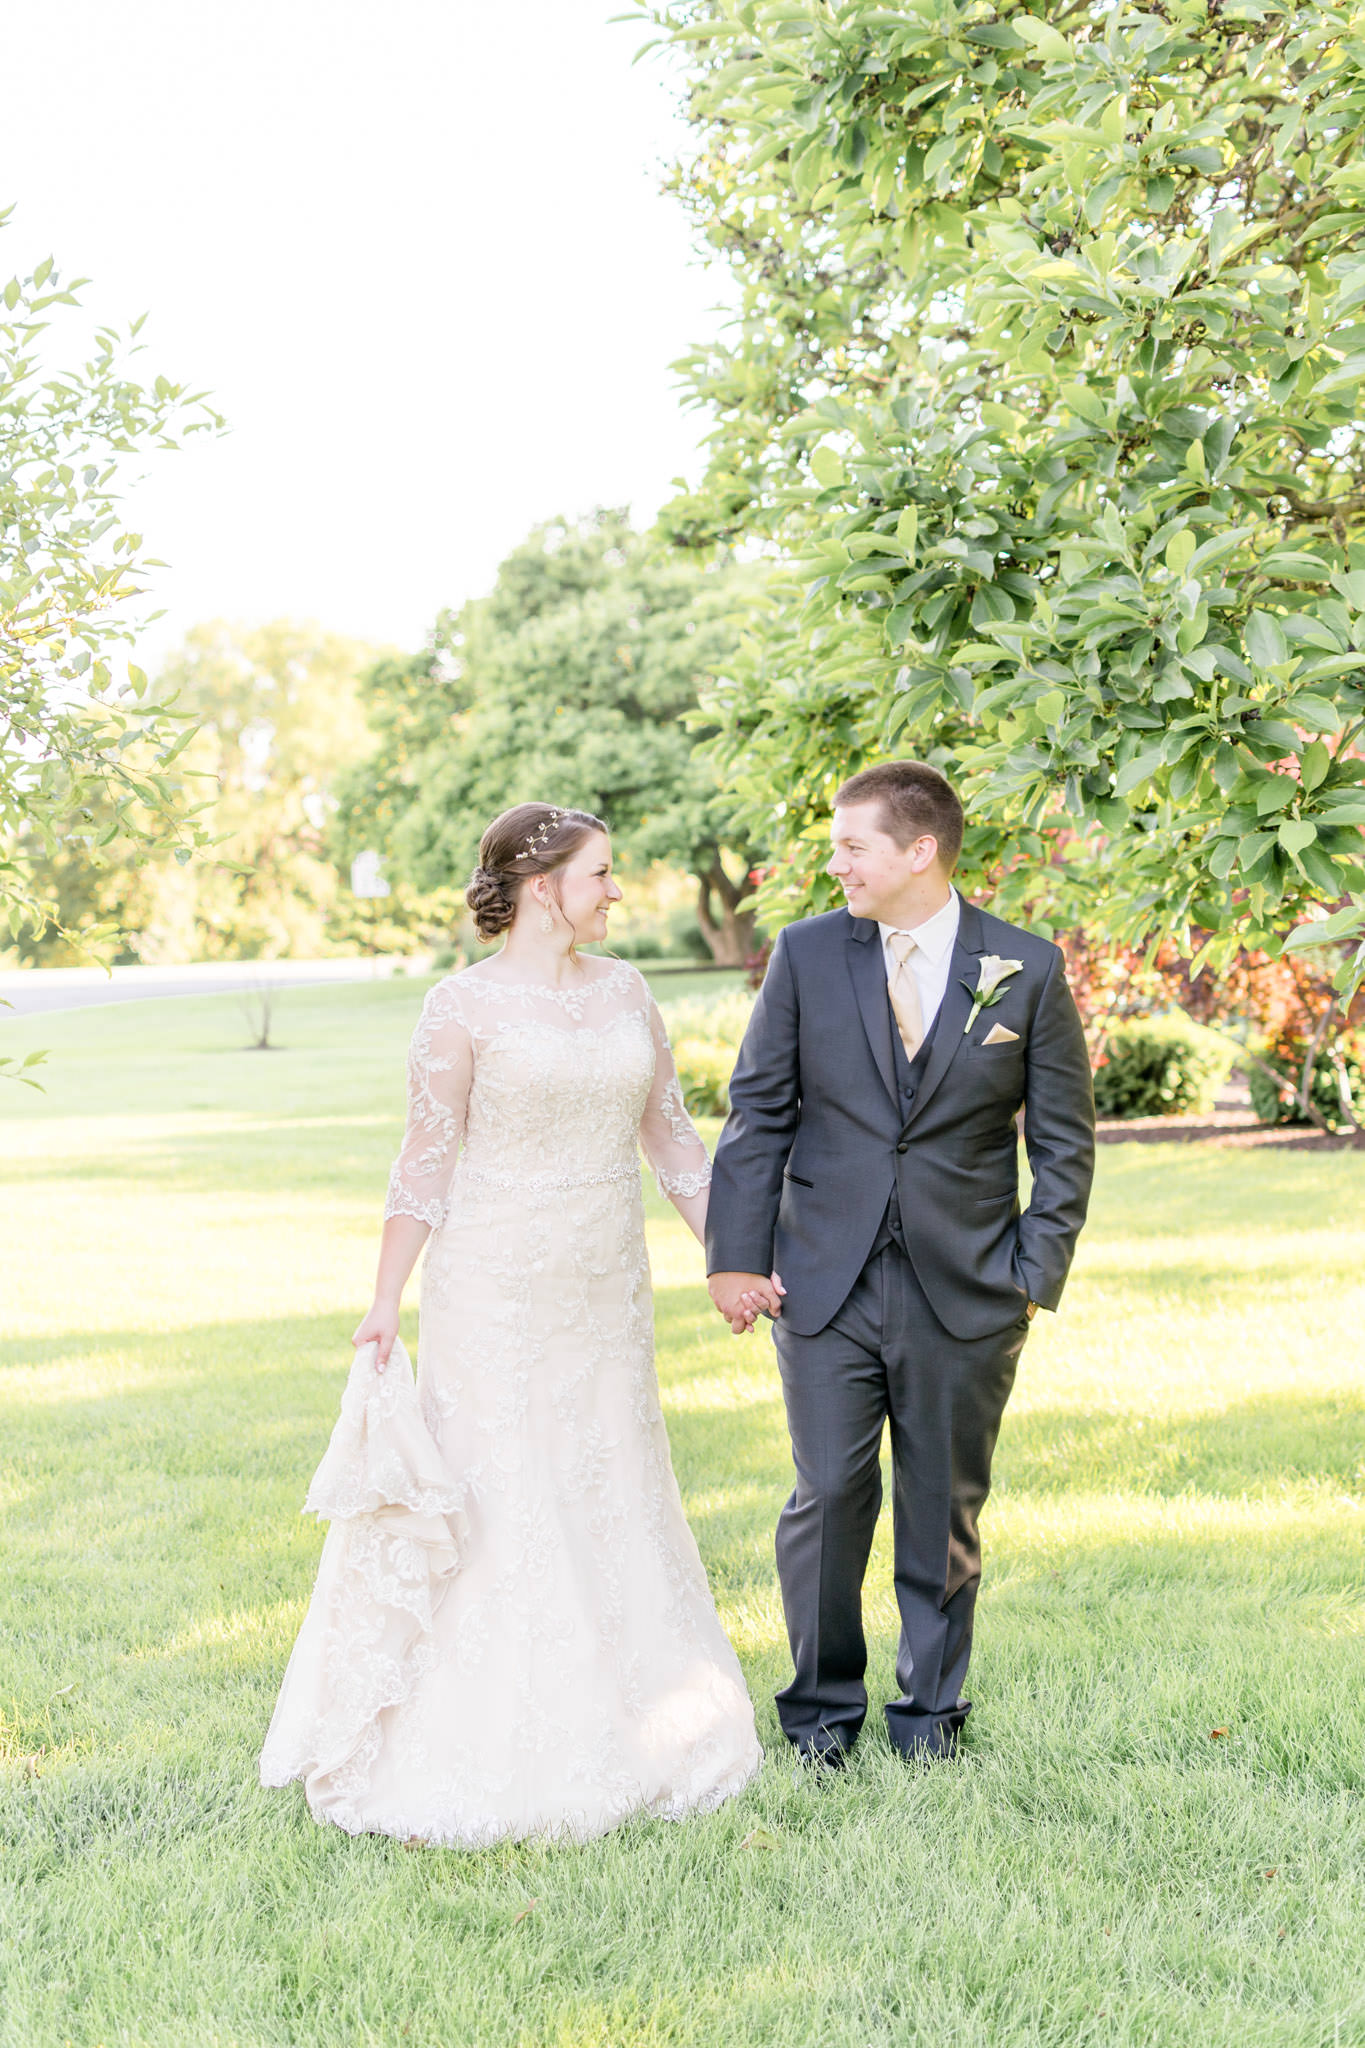 Bride and Groom walk across grass after wedding ceremony